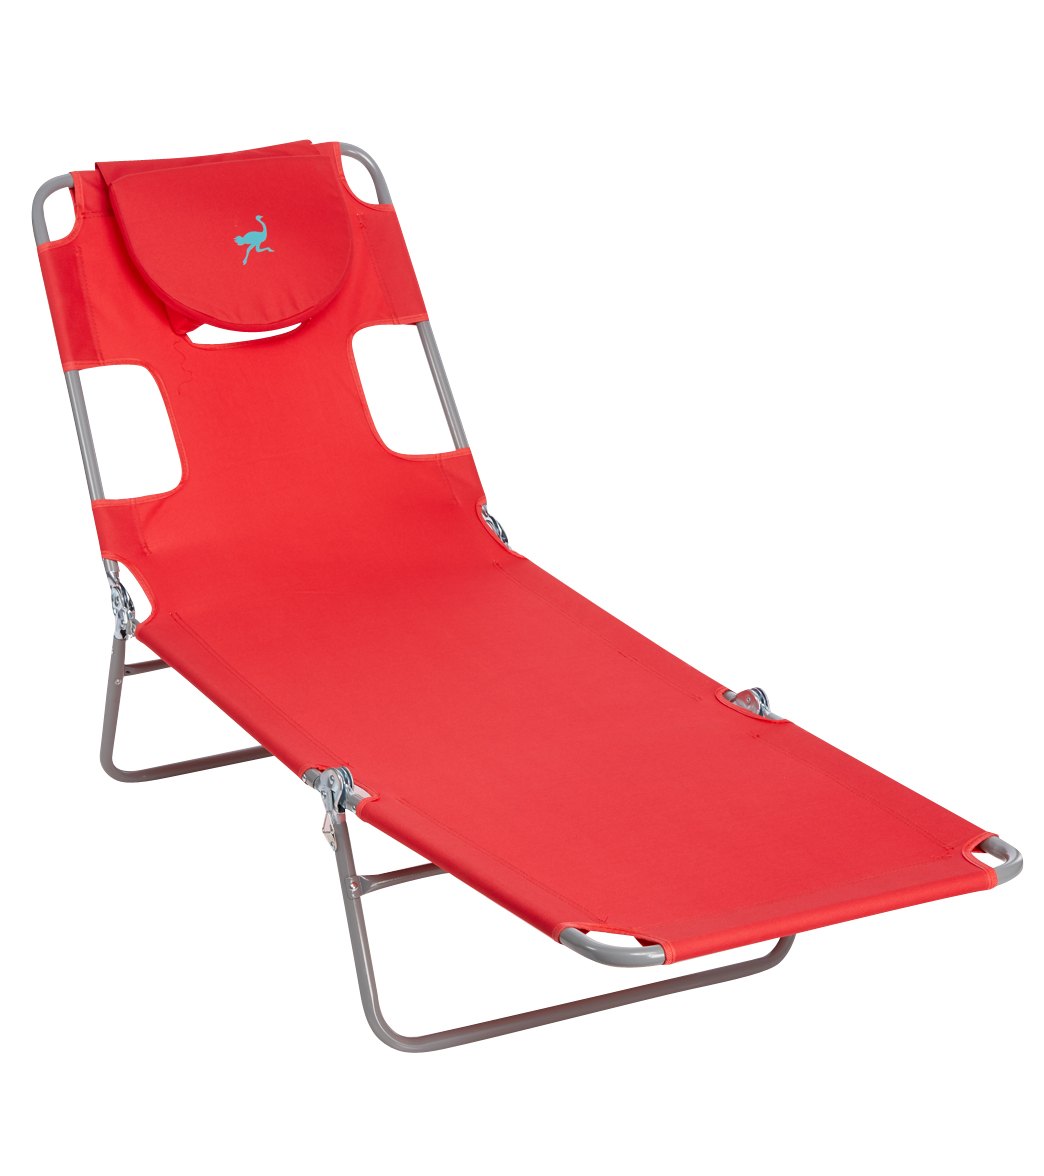 Ostrich Face Down Chaise Lounge at SwimOutlet.com